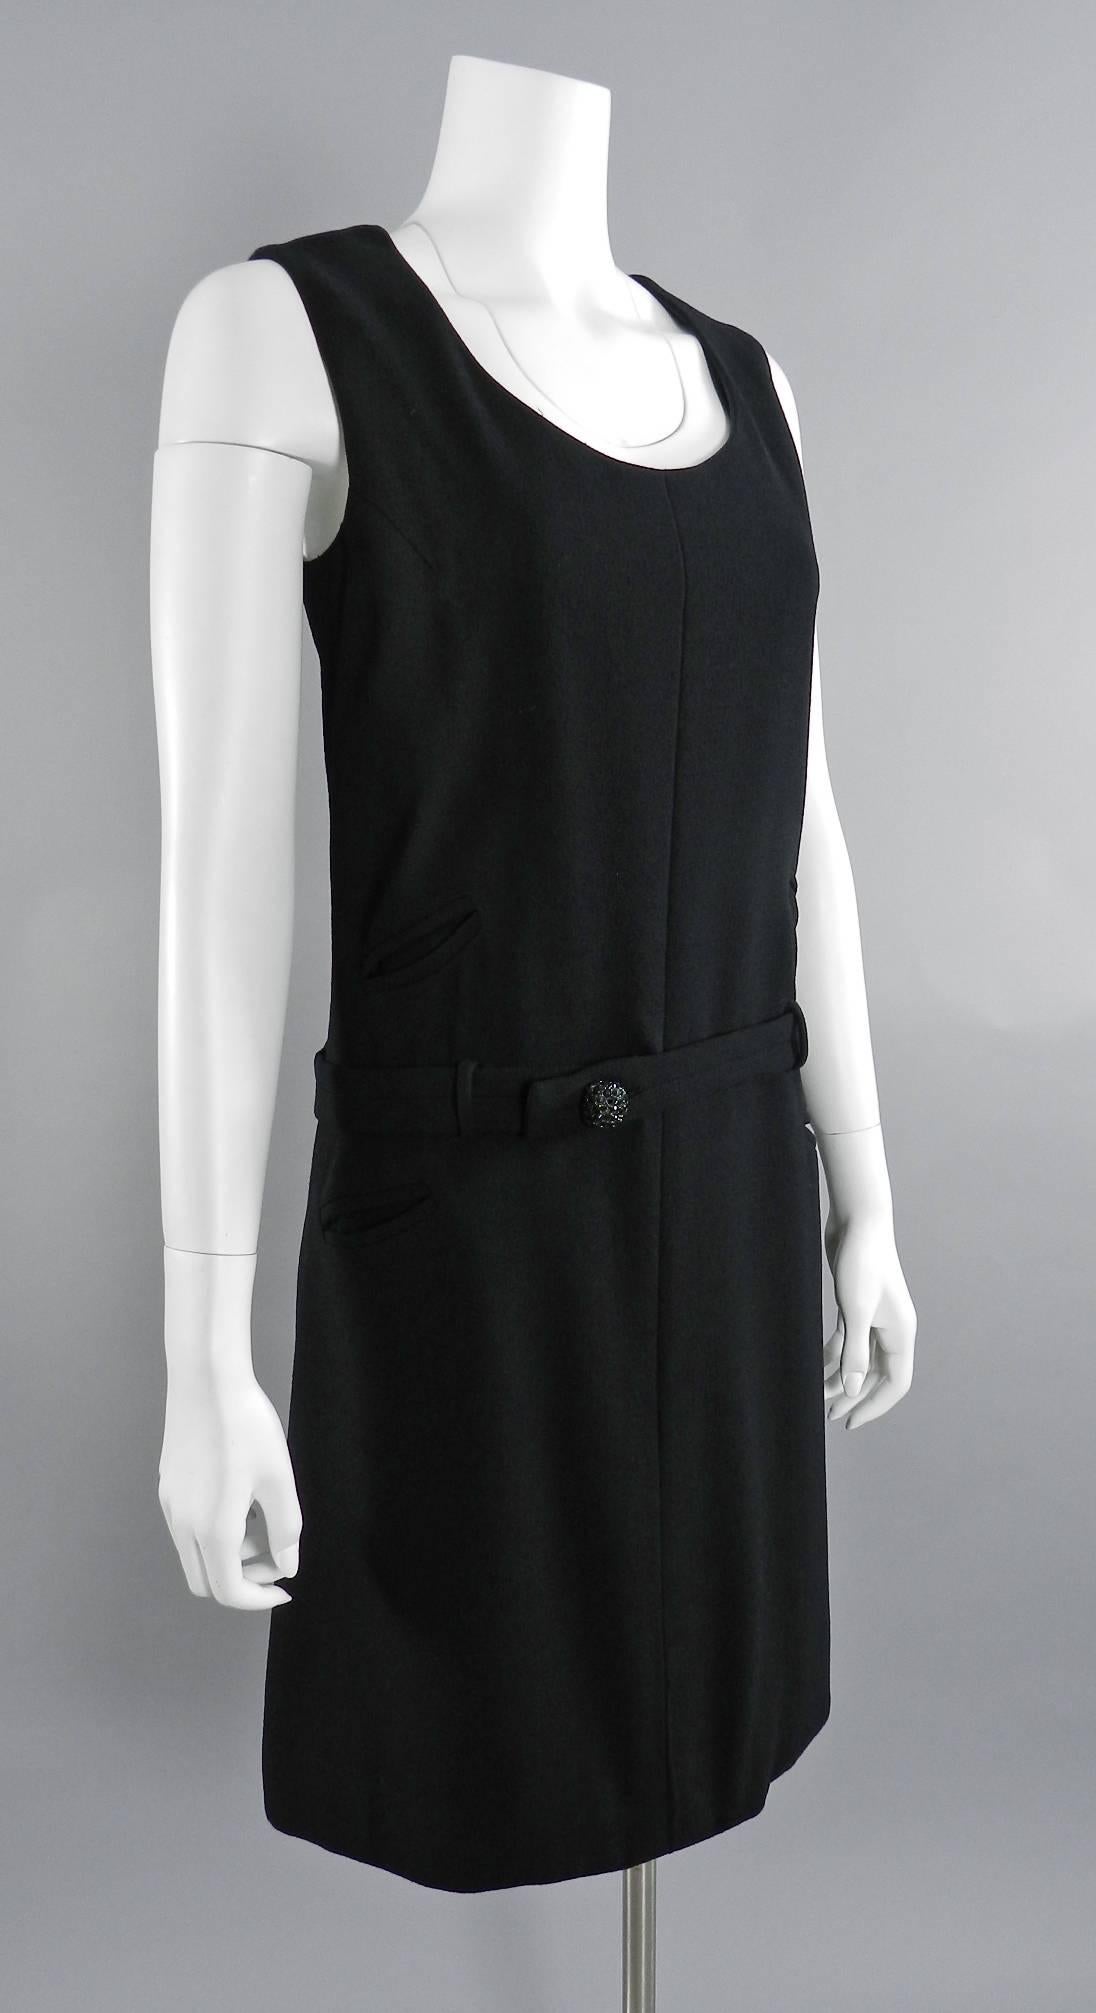 Vintage 1960's Bill Blass black wool sleeveless mod dress. Centre back zipper, drop waist belt, rhinestone jewelled button, lined. Excellent vintage dry-cleaned condition. Approximate size modern USA 10. Garment bust measures 38